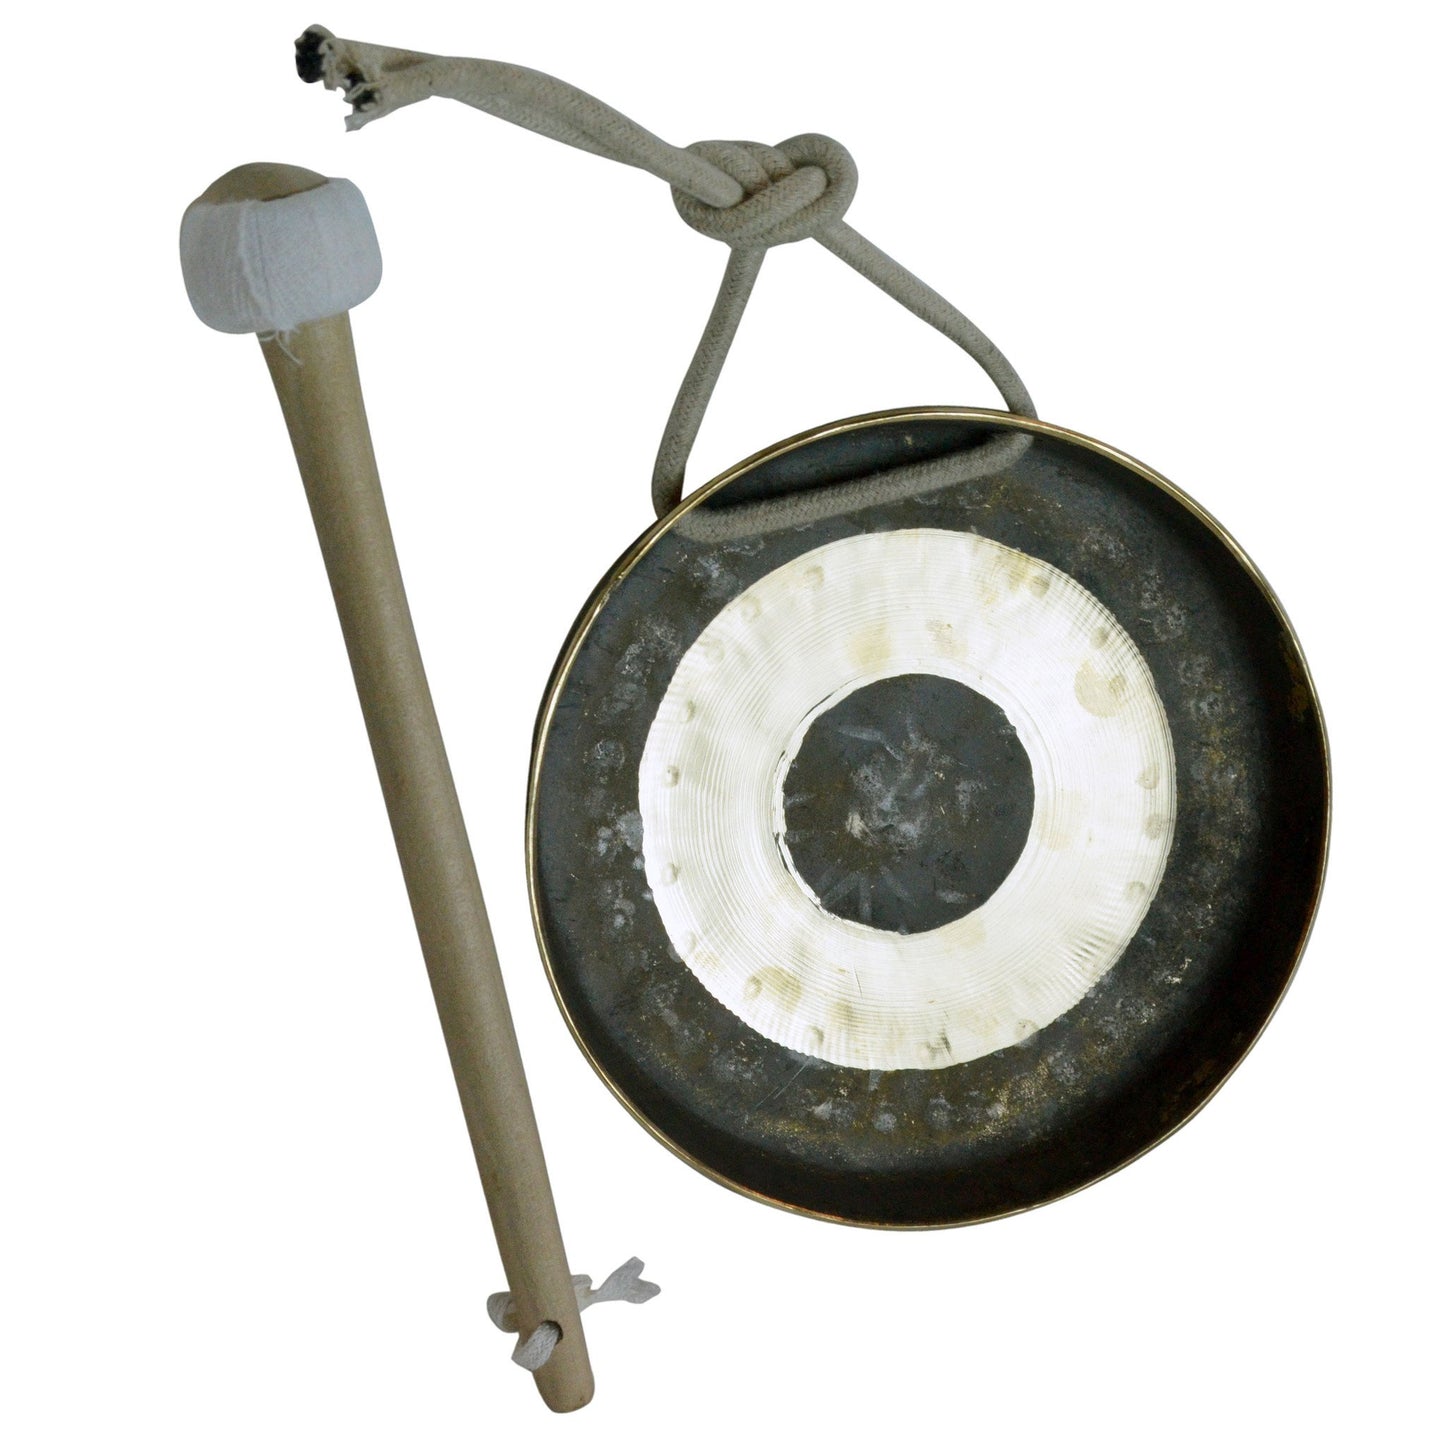 06" Chau Gong with Beater